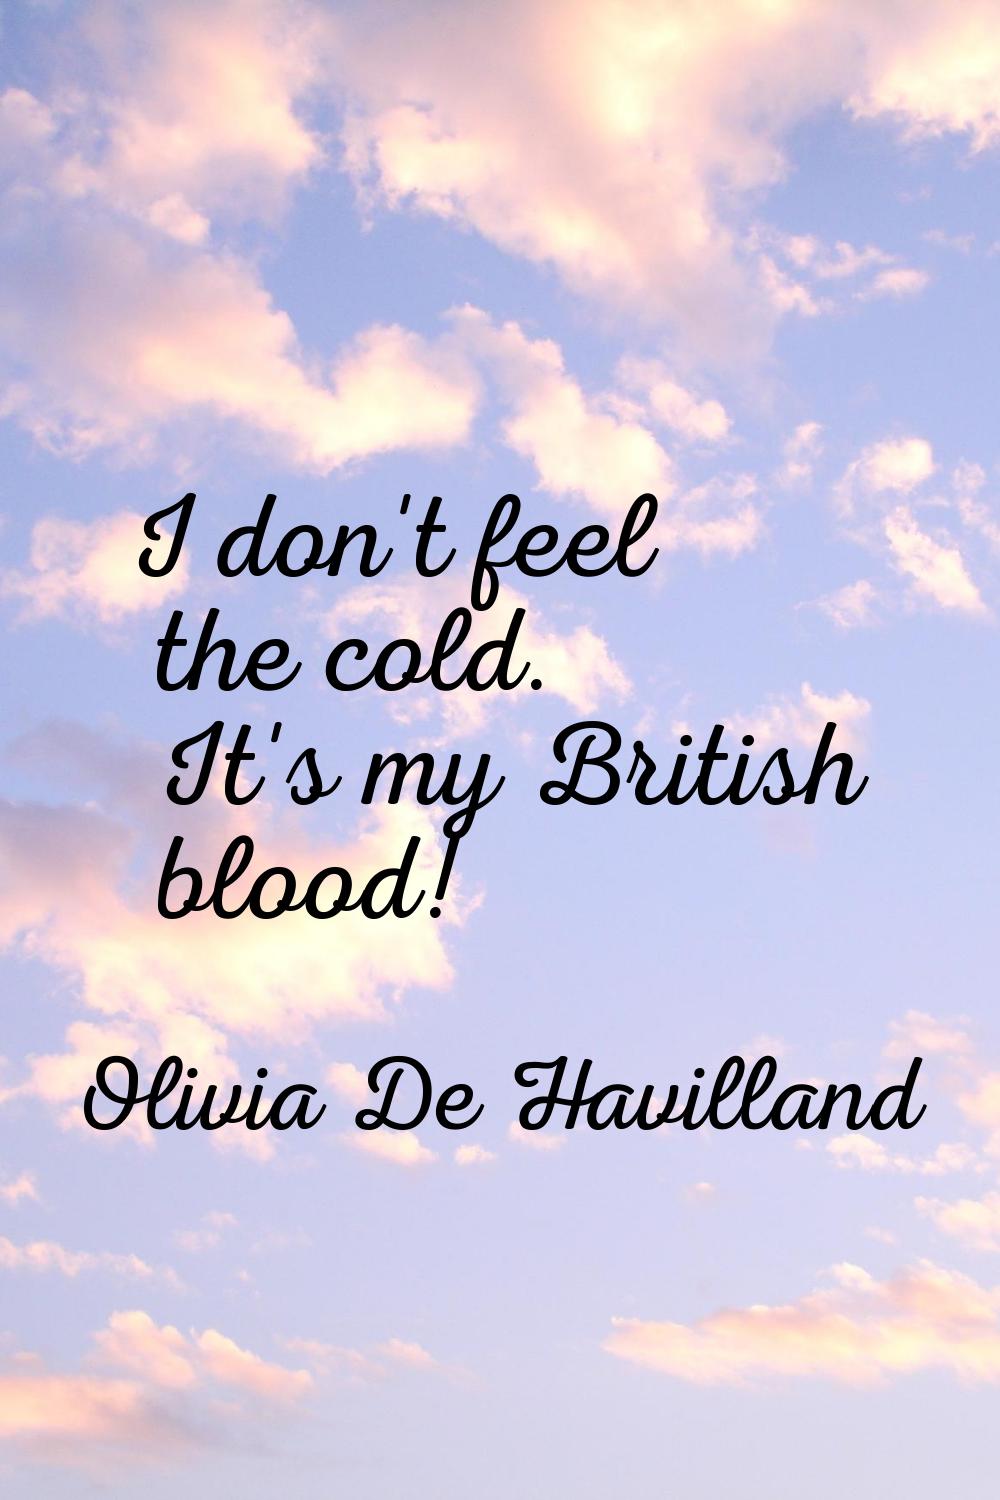 I don't feel the cold. It's my British blood!